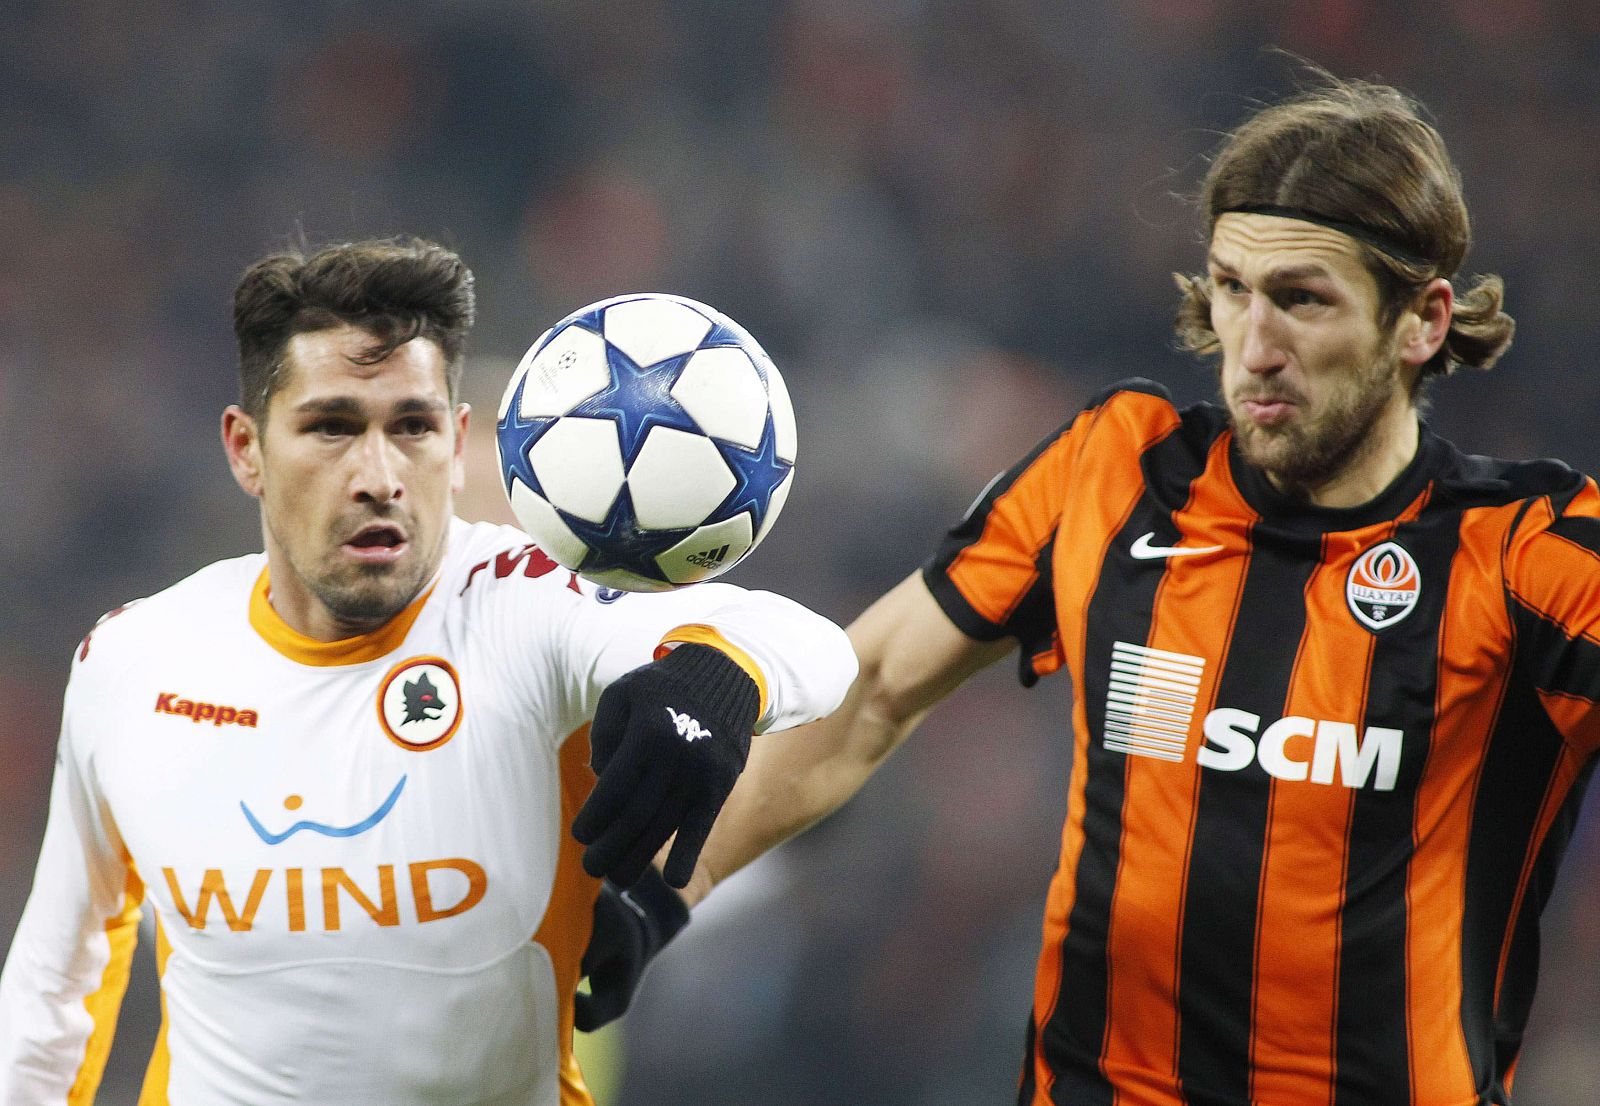 AS Roma's XBorriello challenges Shakhtar Donetsk's Chygrynskiy during their Champions League soccer match in Donetsk